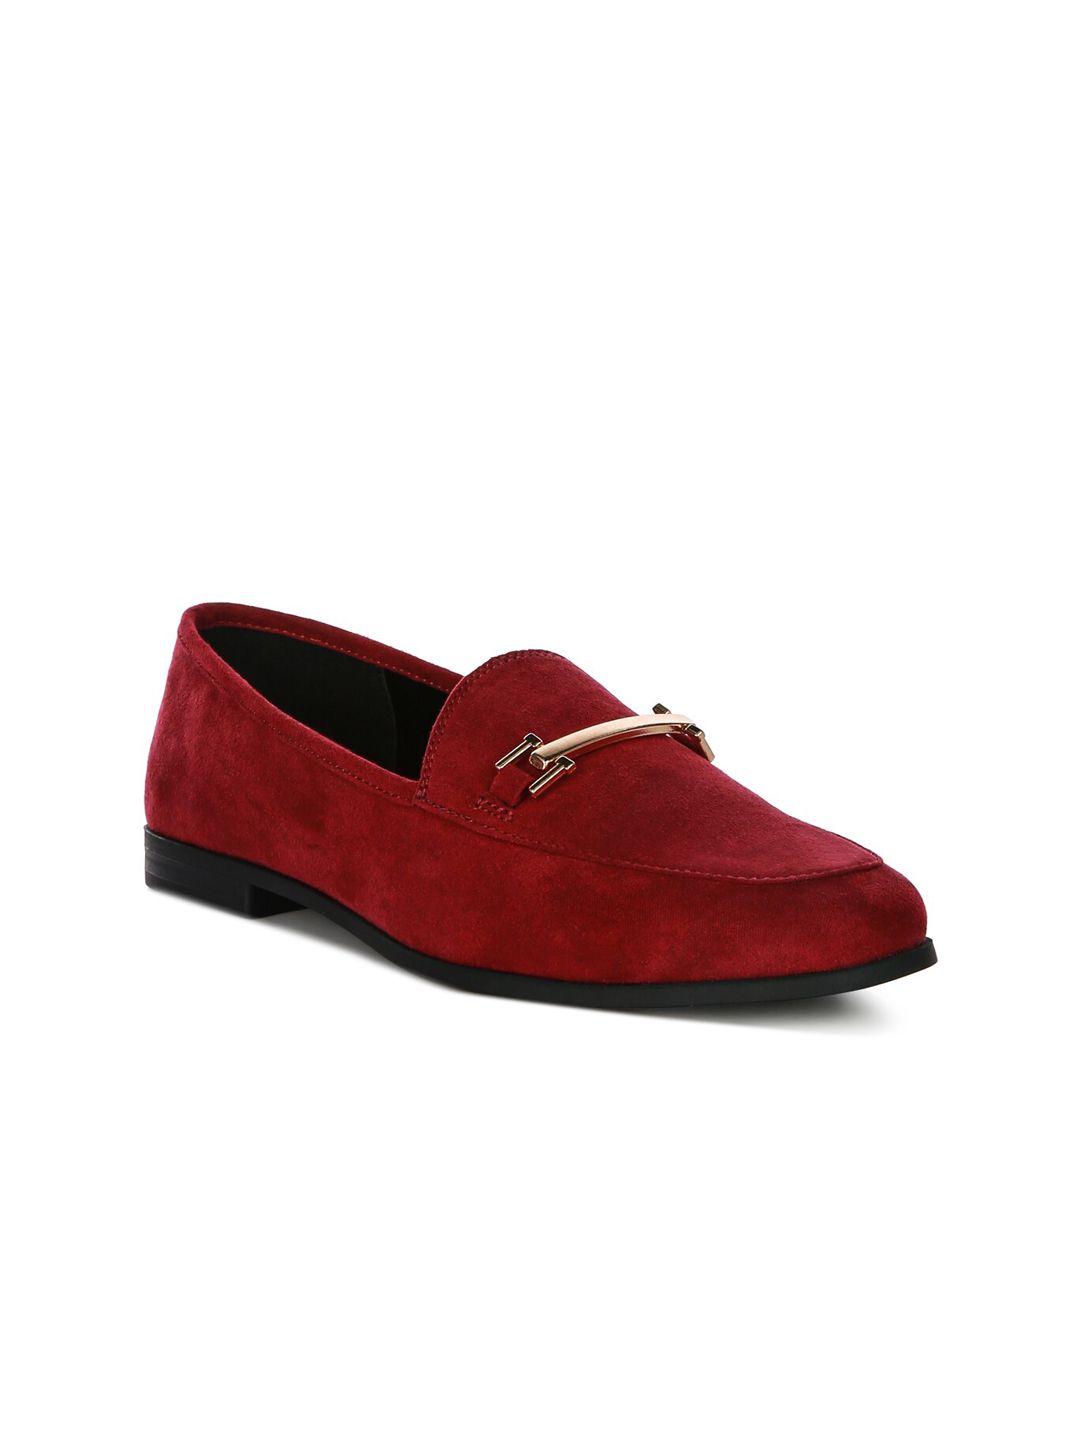 London Rag Women Burgundy Printed Suede Loafers Price in India